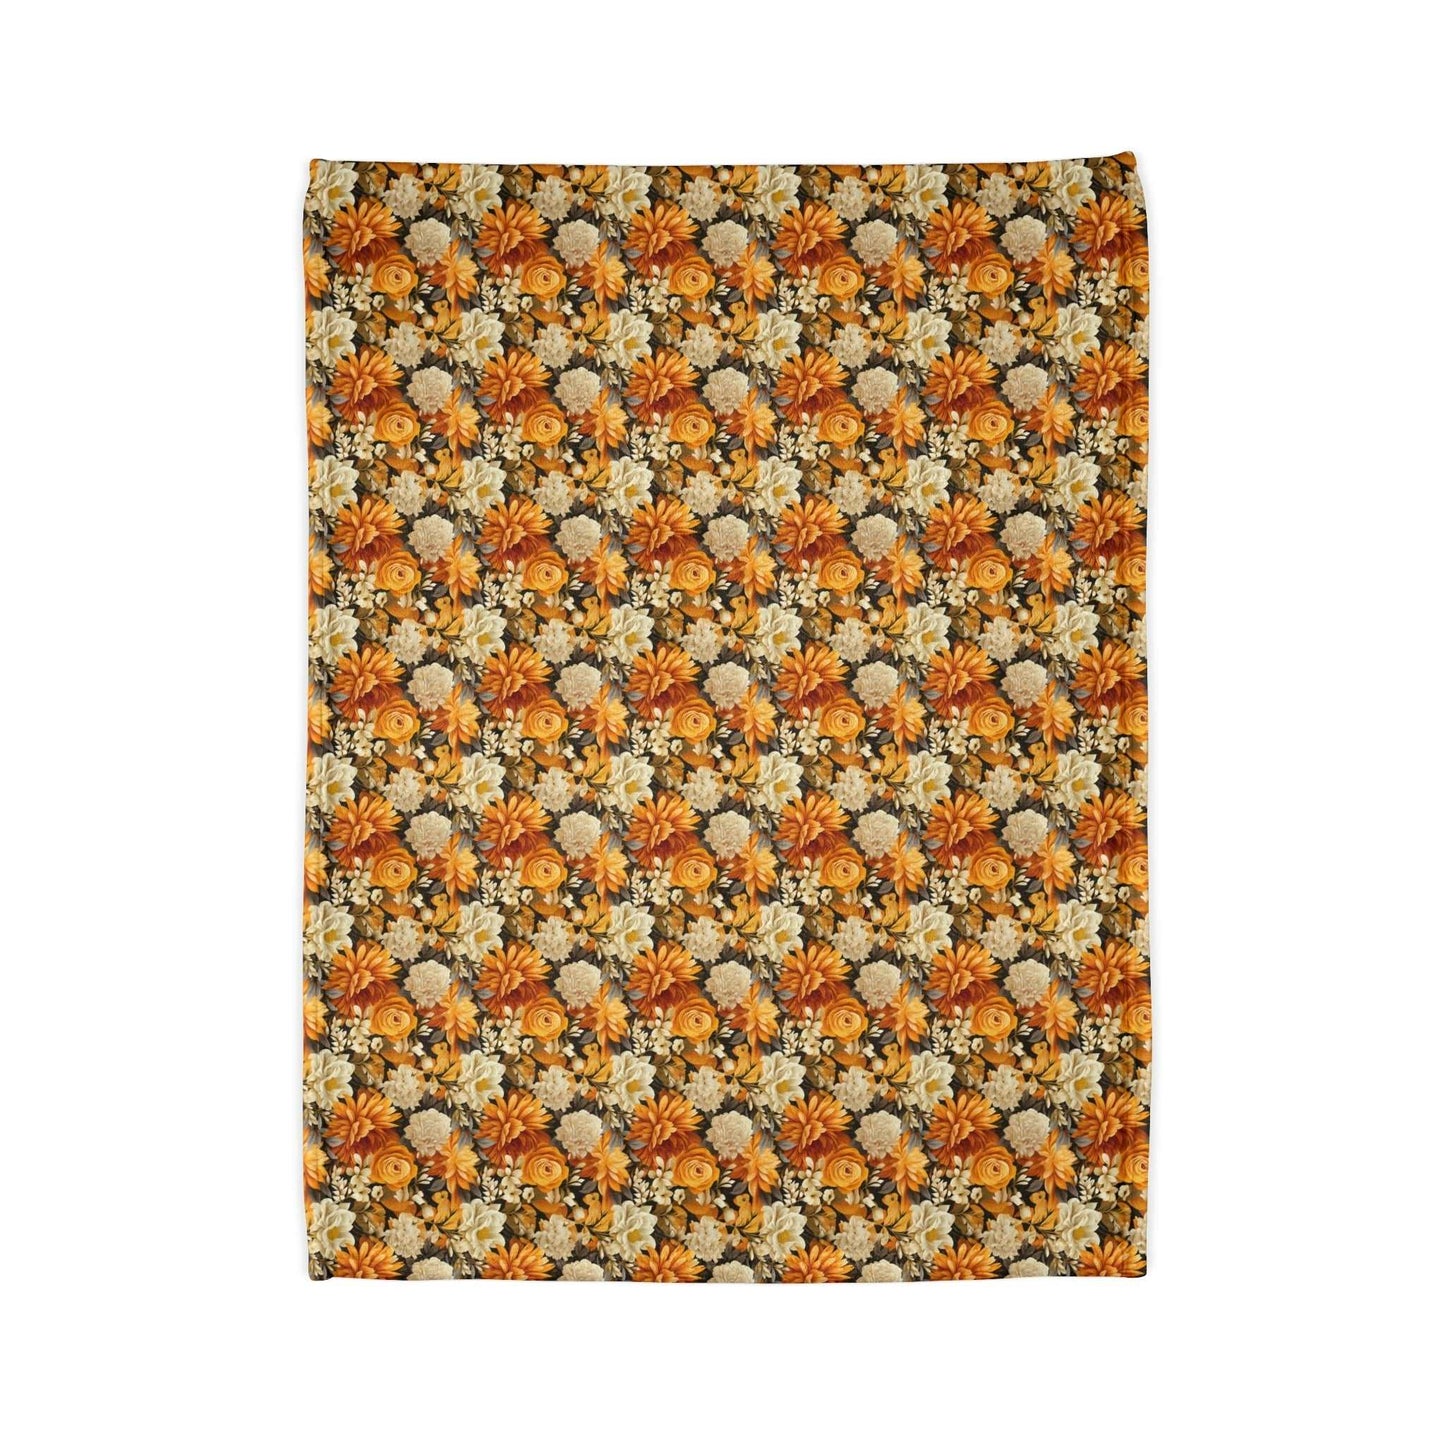 Autumnal Romance: Golden and White Blossoms on Black - The Ideal Throw for Sofas - Pattern Symphony